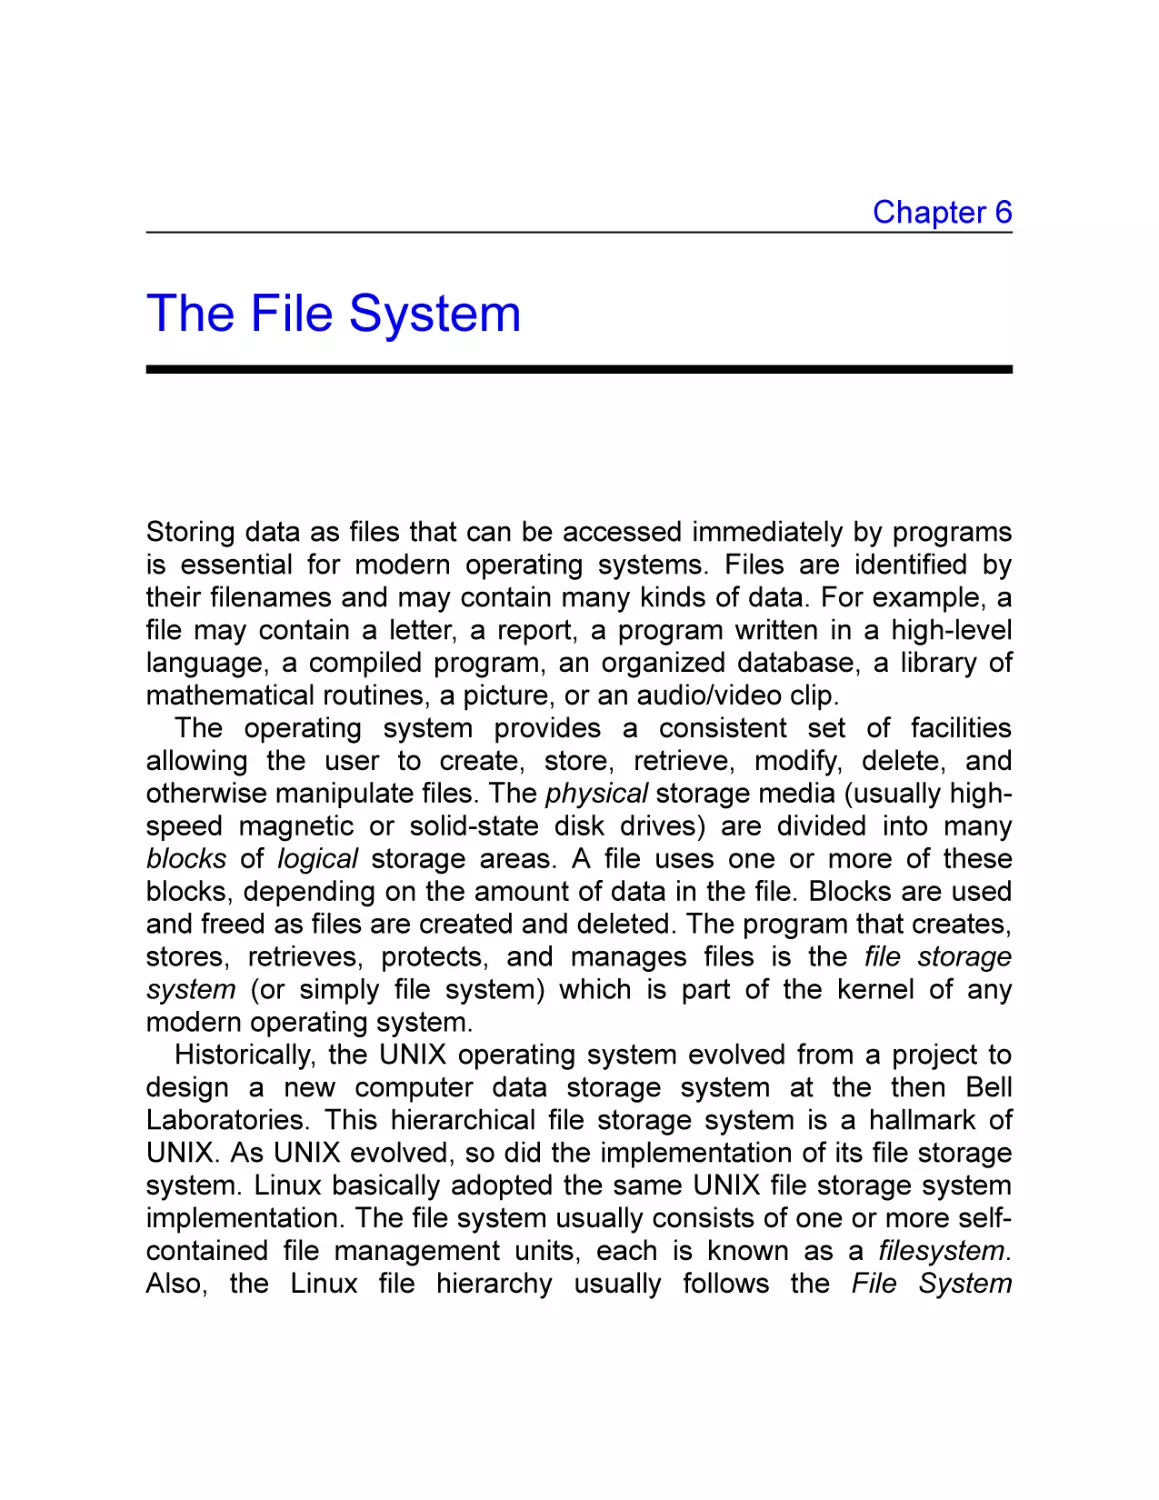 6 The File System